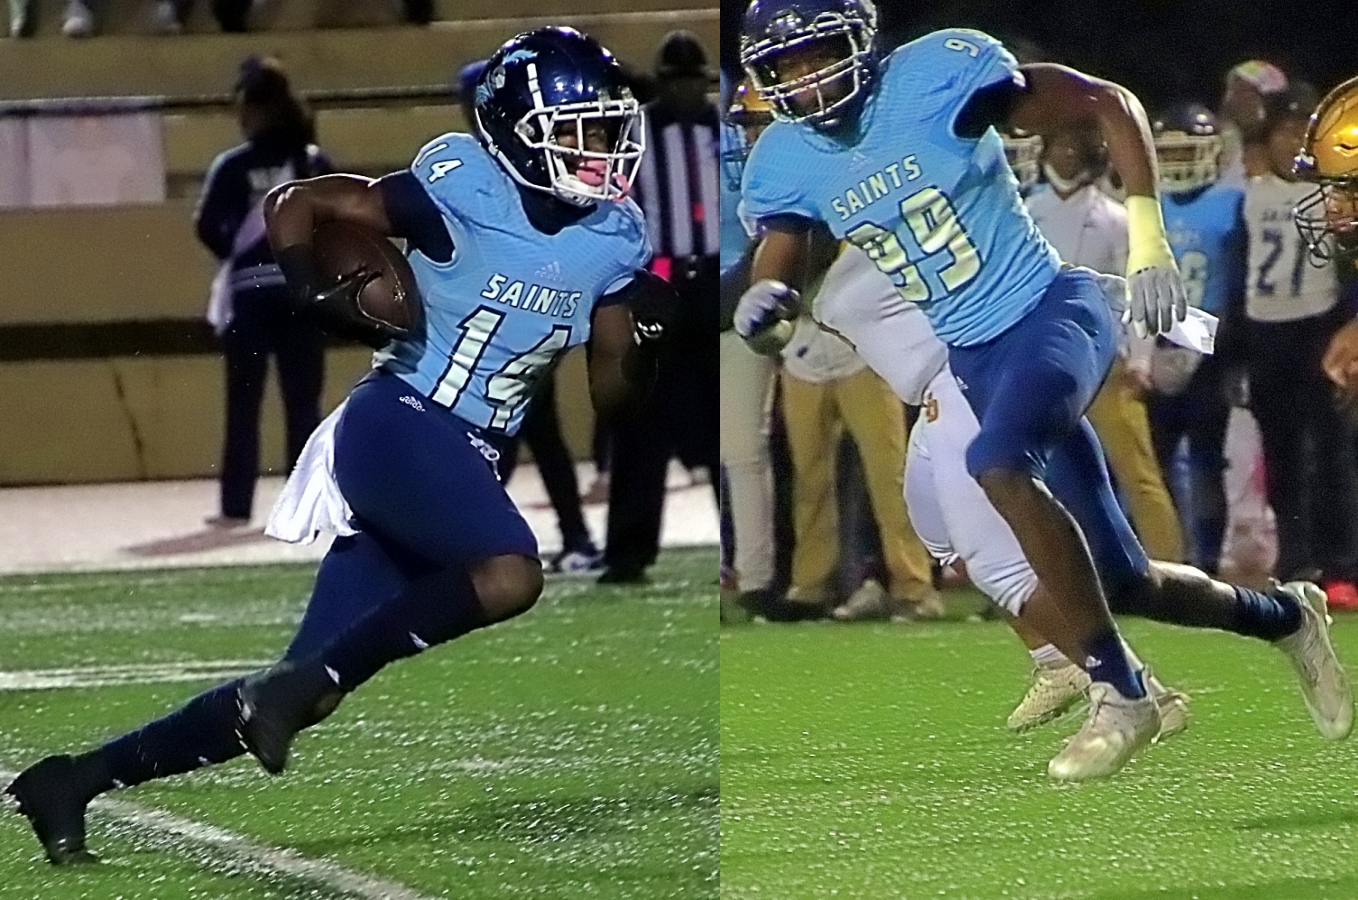 Cedar Grove's Barry Jackson (left) had two receiving touchdowns in the Saints playoff win over White County. Defensive lineman Adonijah Green (right) had an interception and a sack for the Saints in the playoff win. (File photos by Mark Brock)